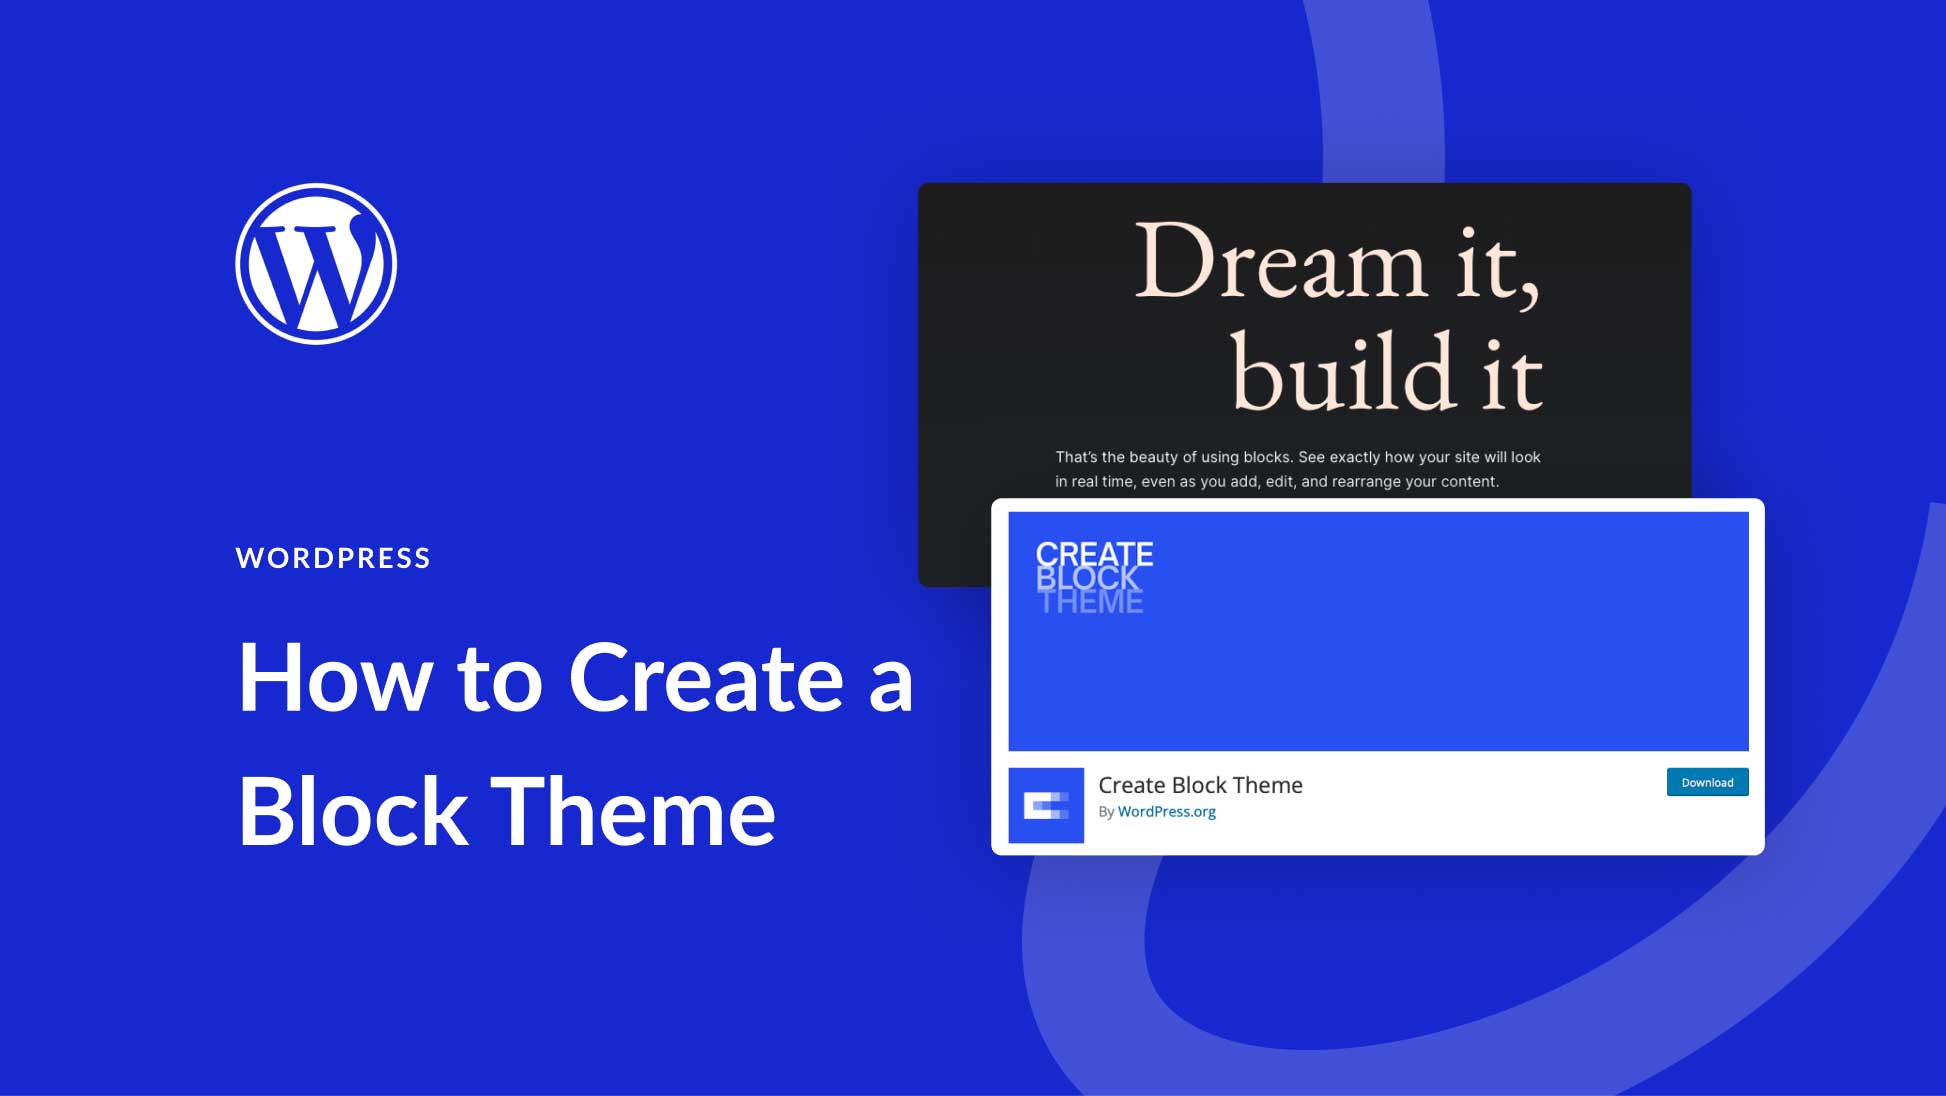 How to Create a Block Theme for WordPress (The Easy Way)